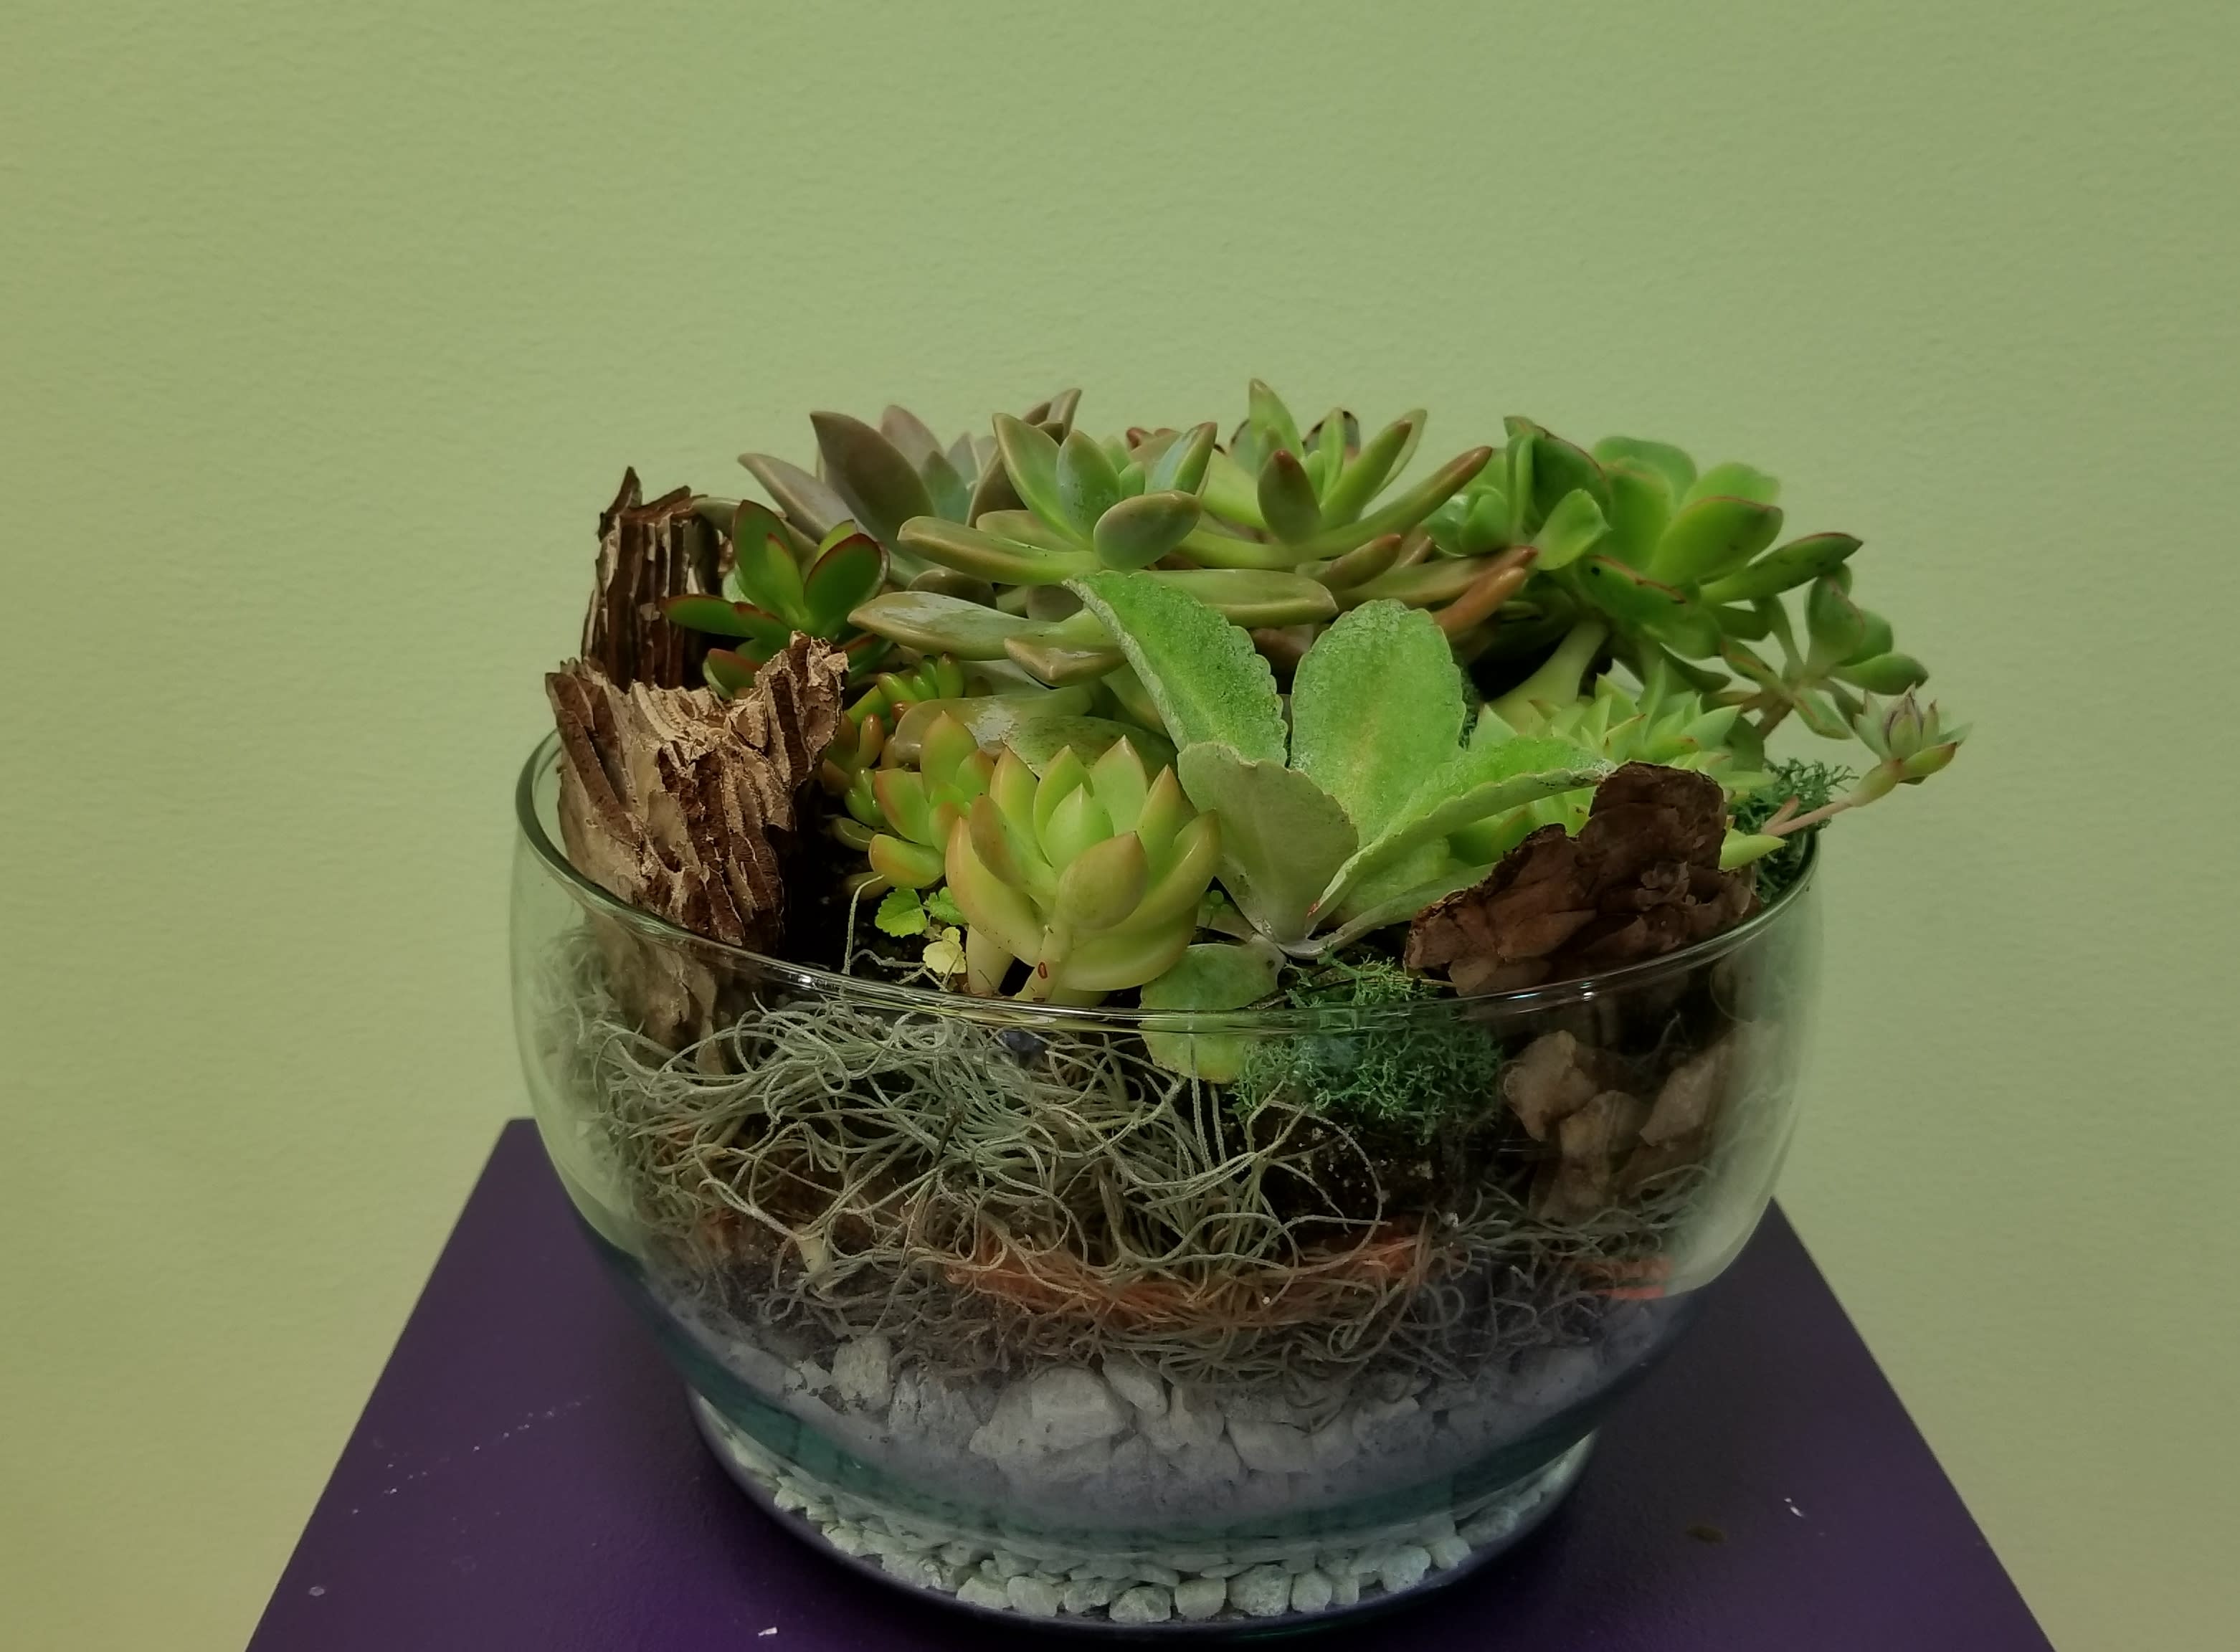 Ovation Bowl Terrarium - Each design is one of a kind. The terrarium includes a beautiful variety of succulents that are each handpicked by one of our professional designers. 